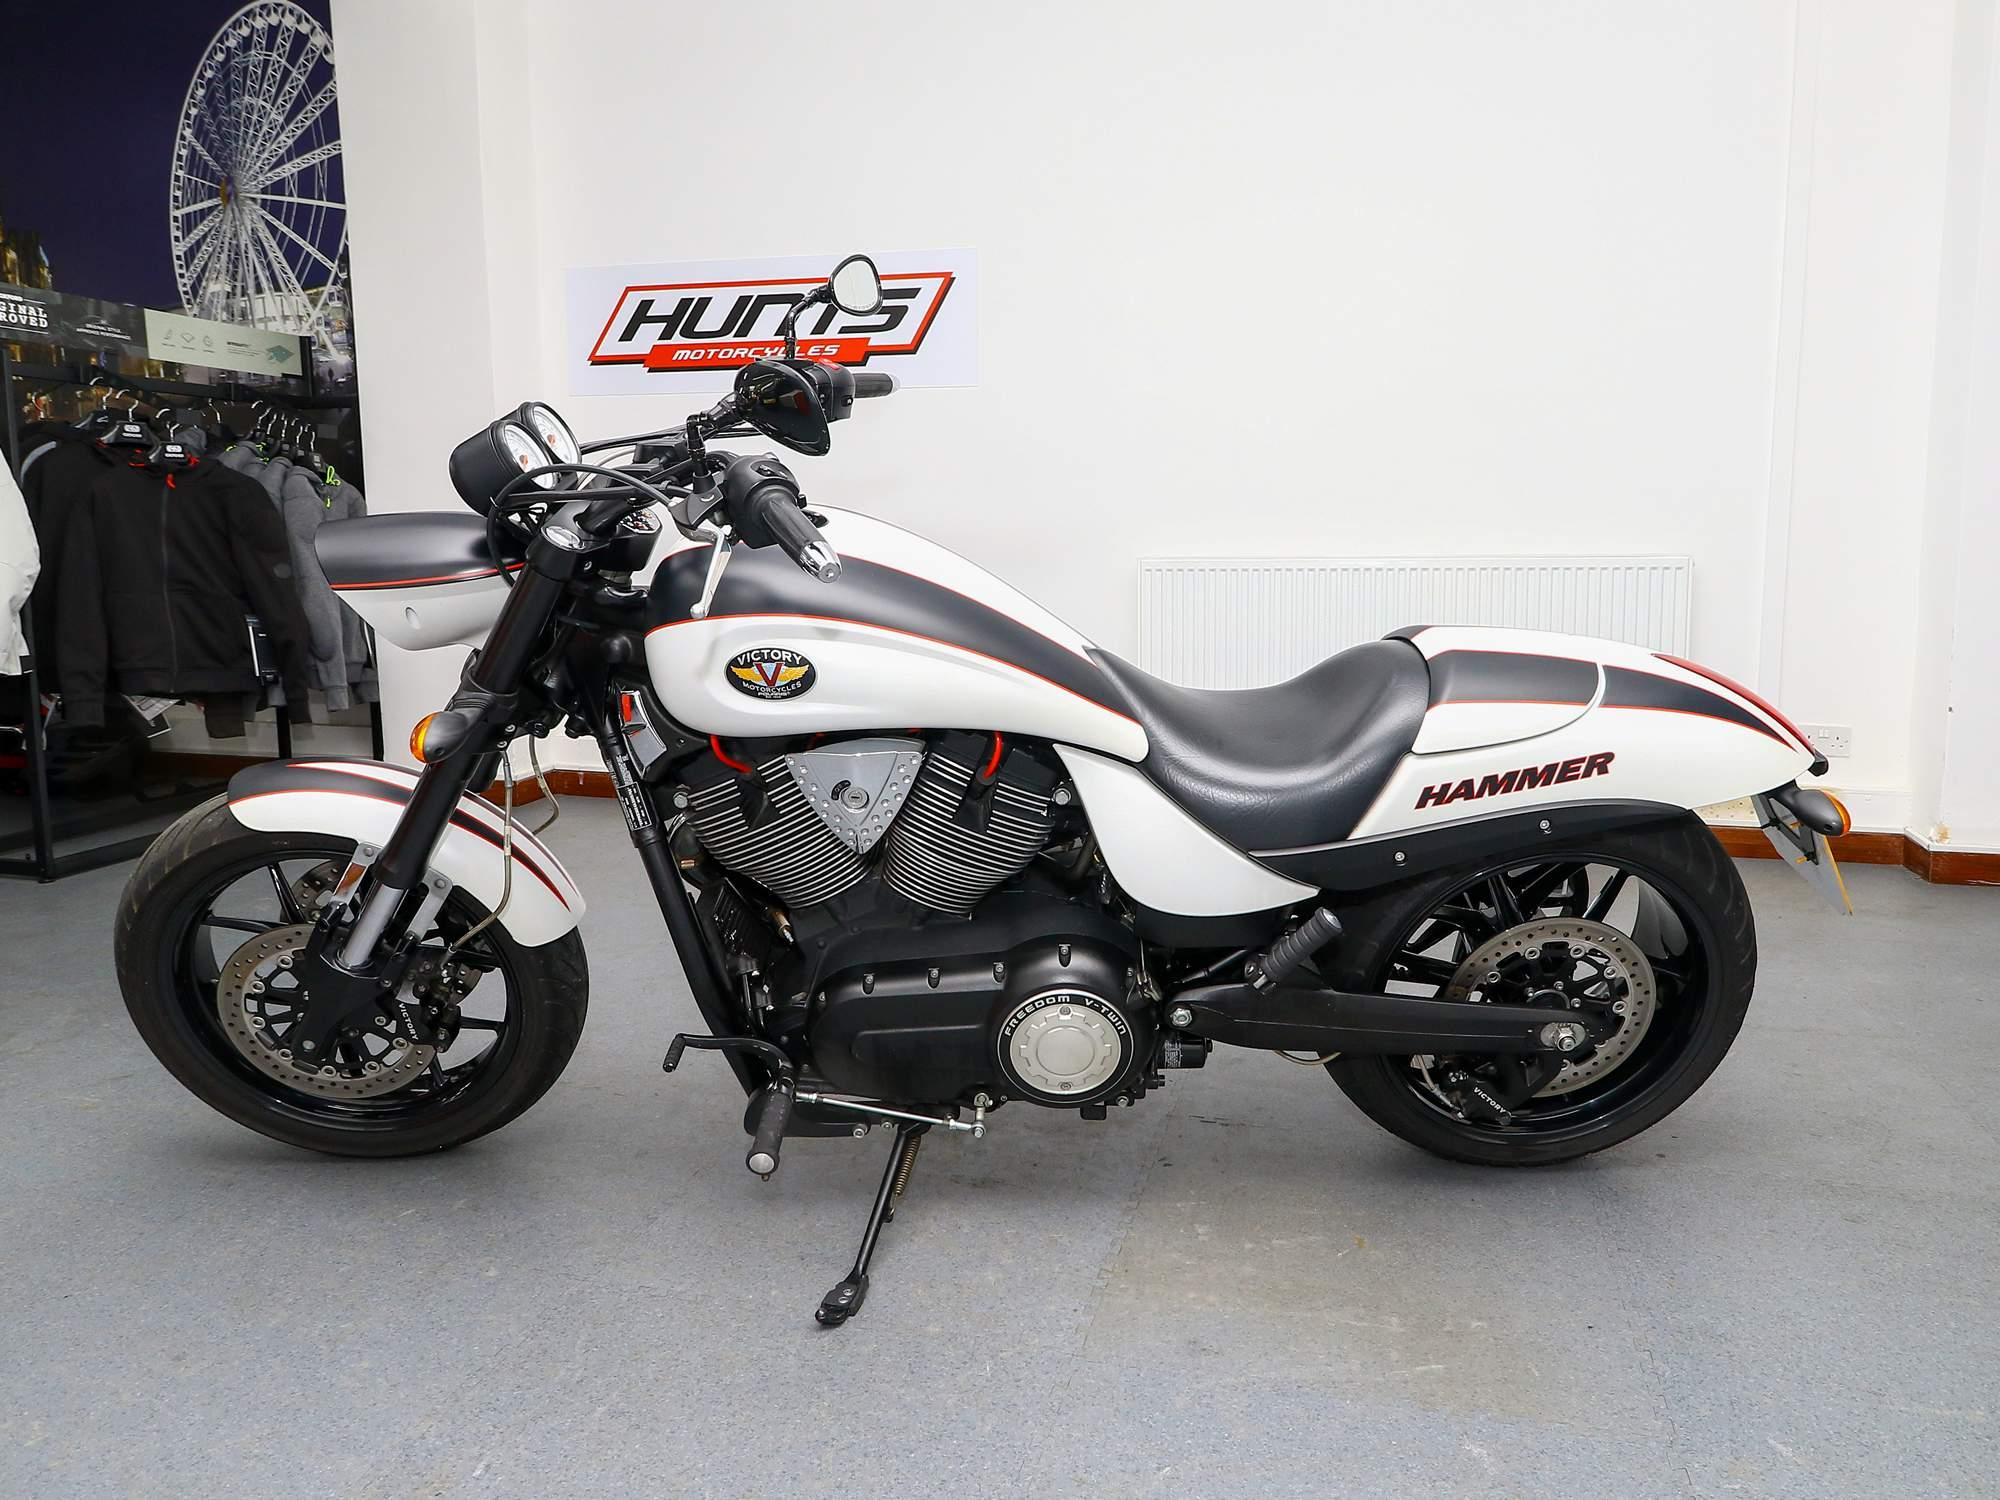 2011 Victory Hammer 1700 S